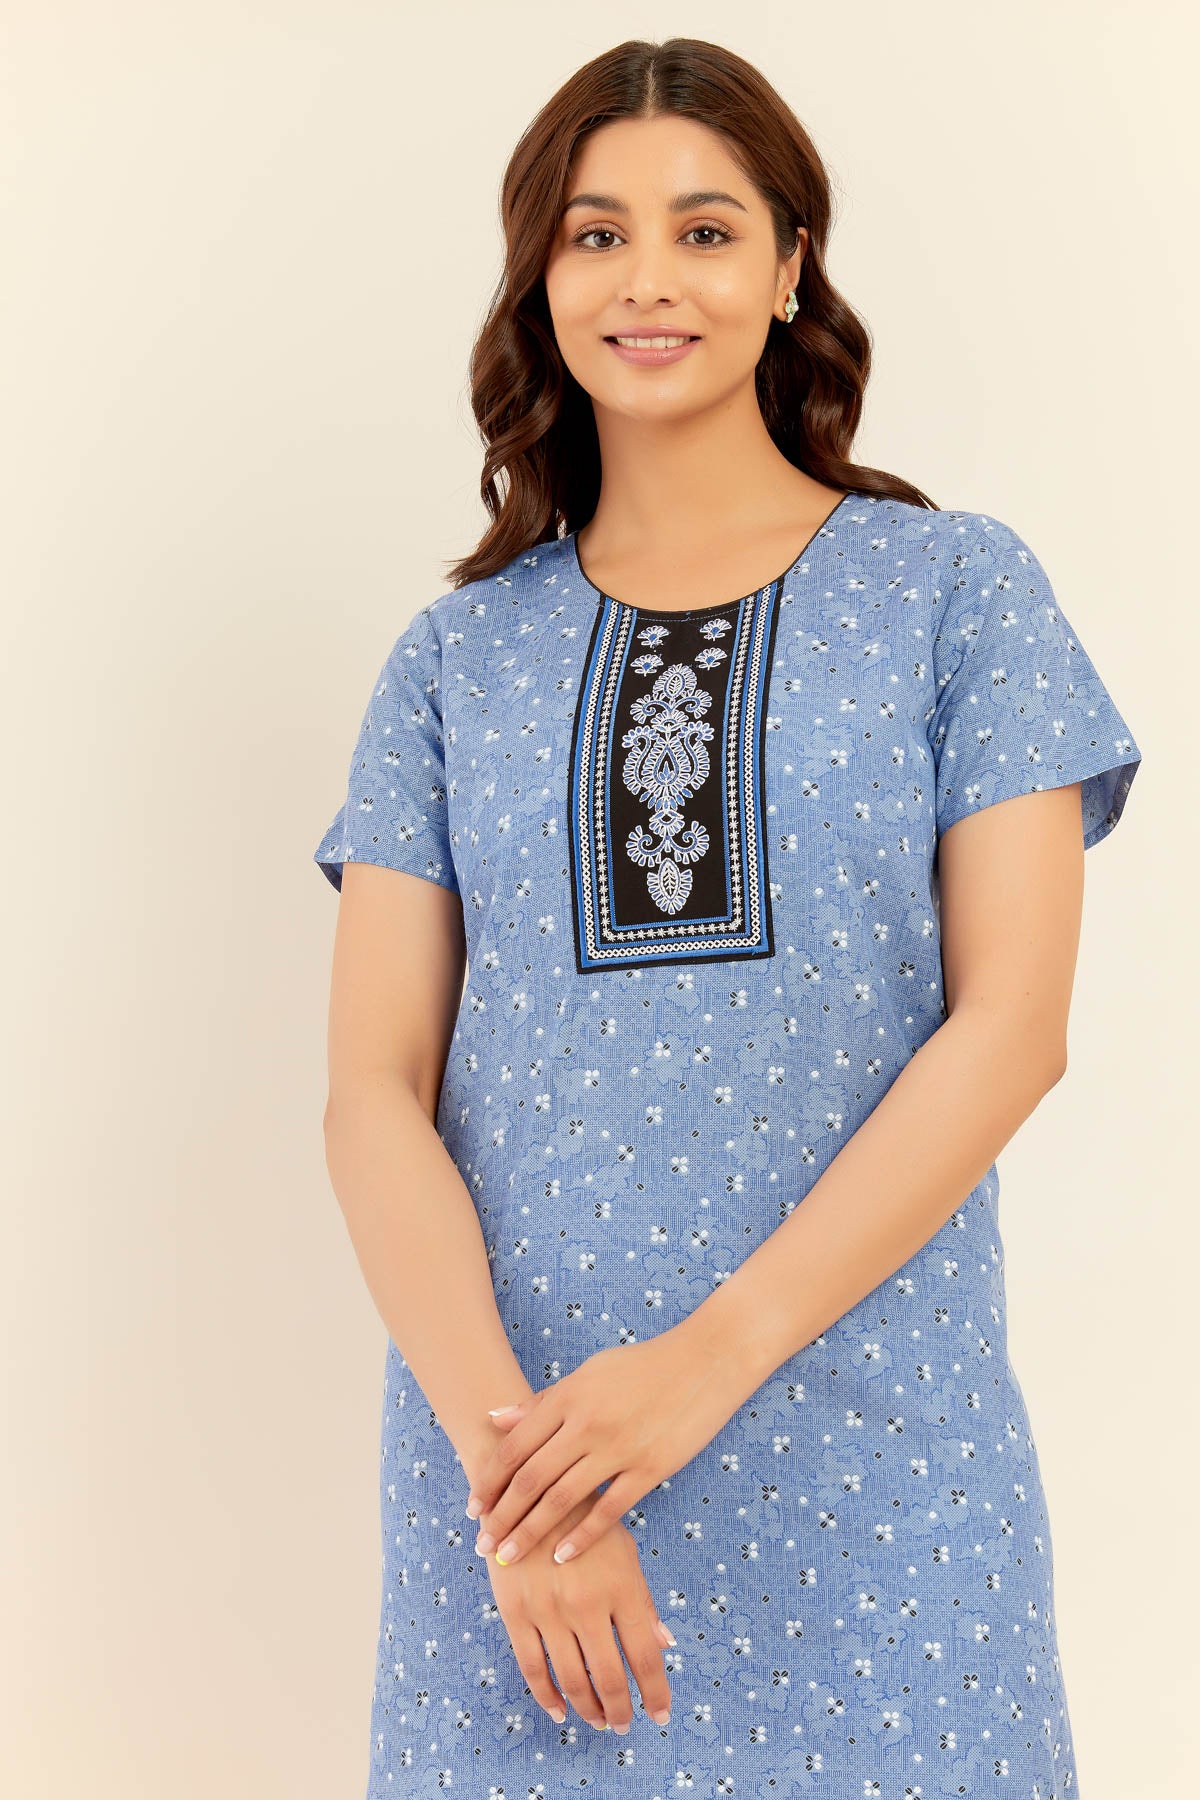 All Over Ditsy Geometric Print With Embroidered Yoke Nighty - Blue